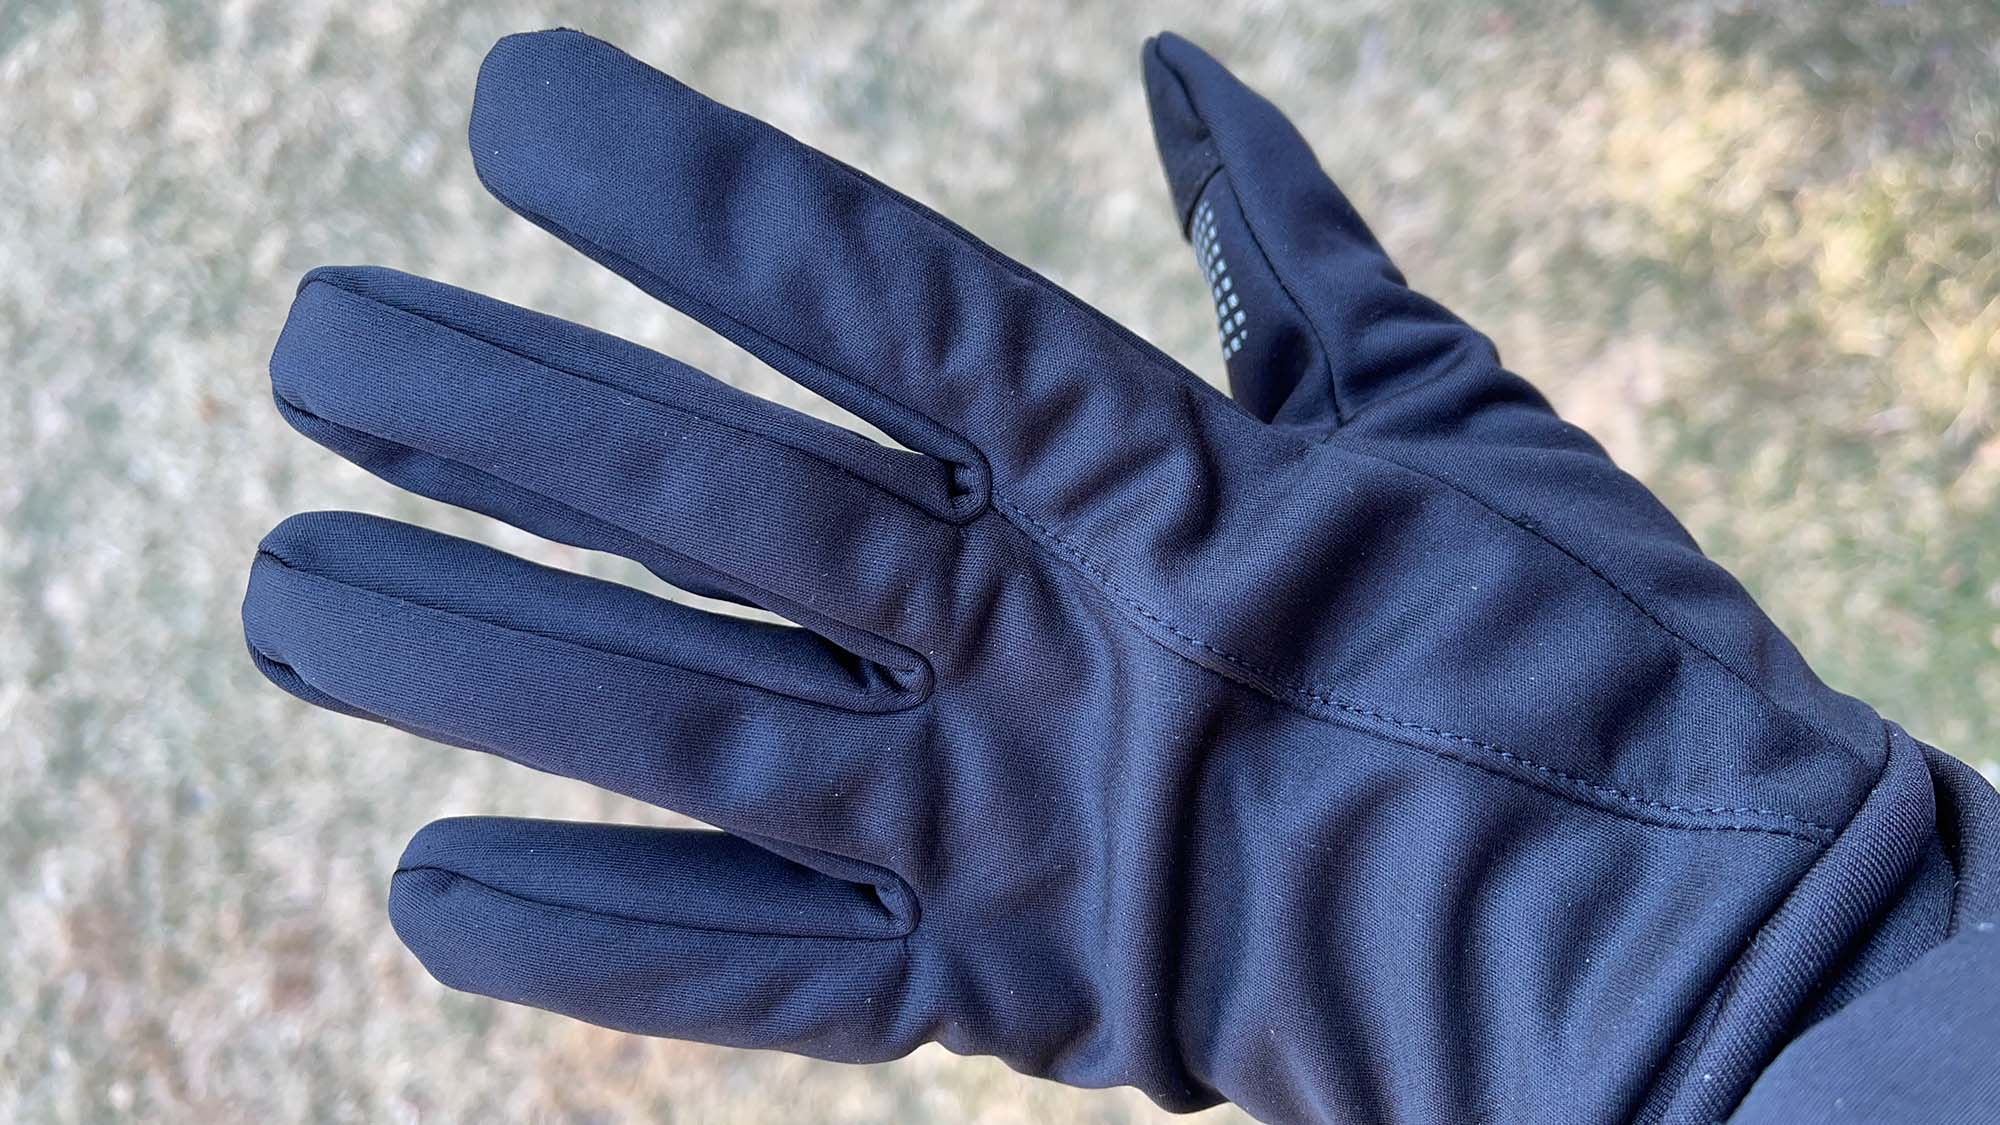 Best gloves for cold weather | Underscored